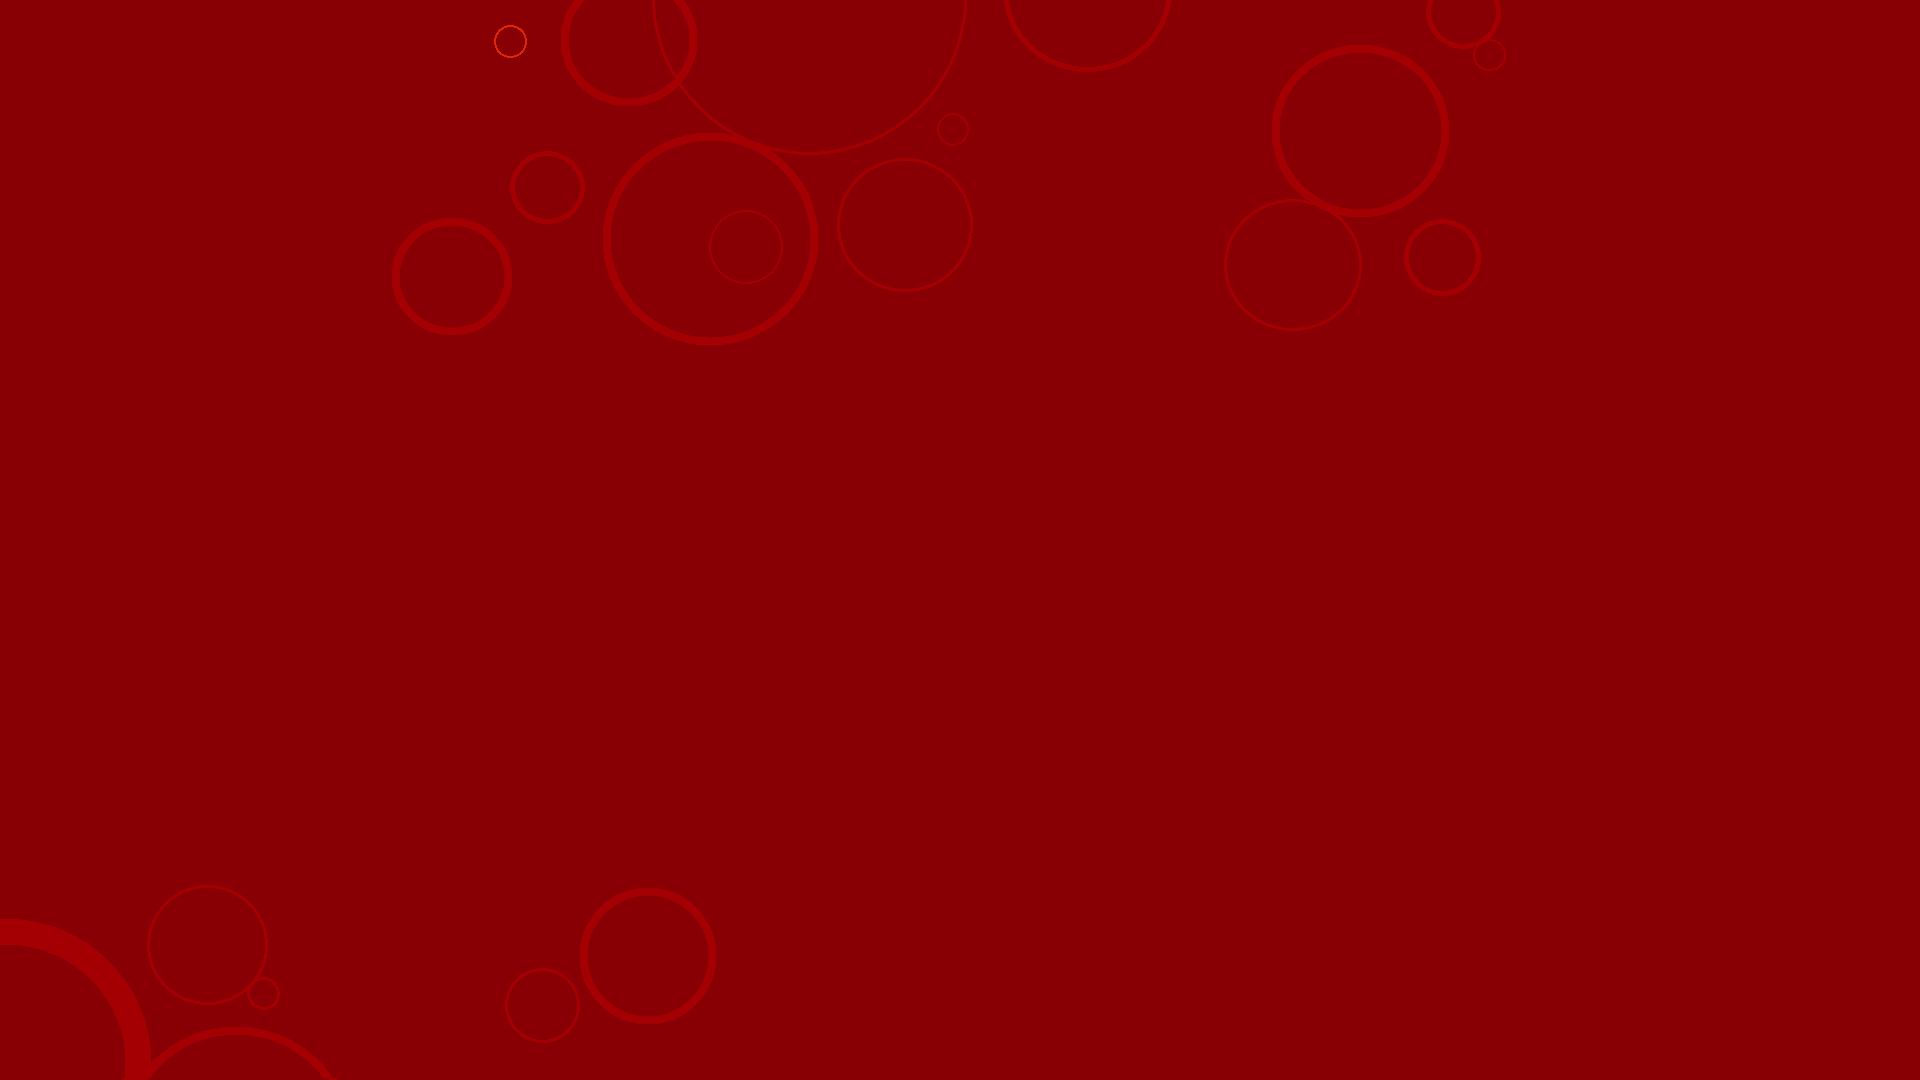 More Like Dark Red Windows 8 Bubbles Background